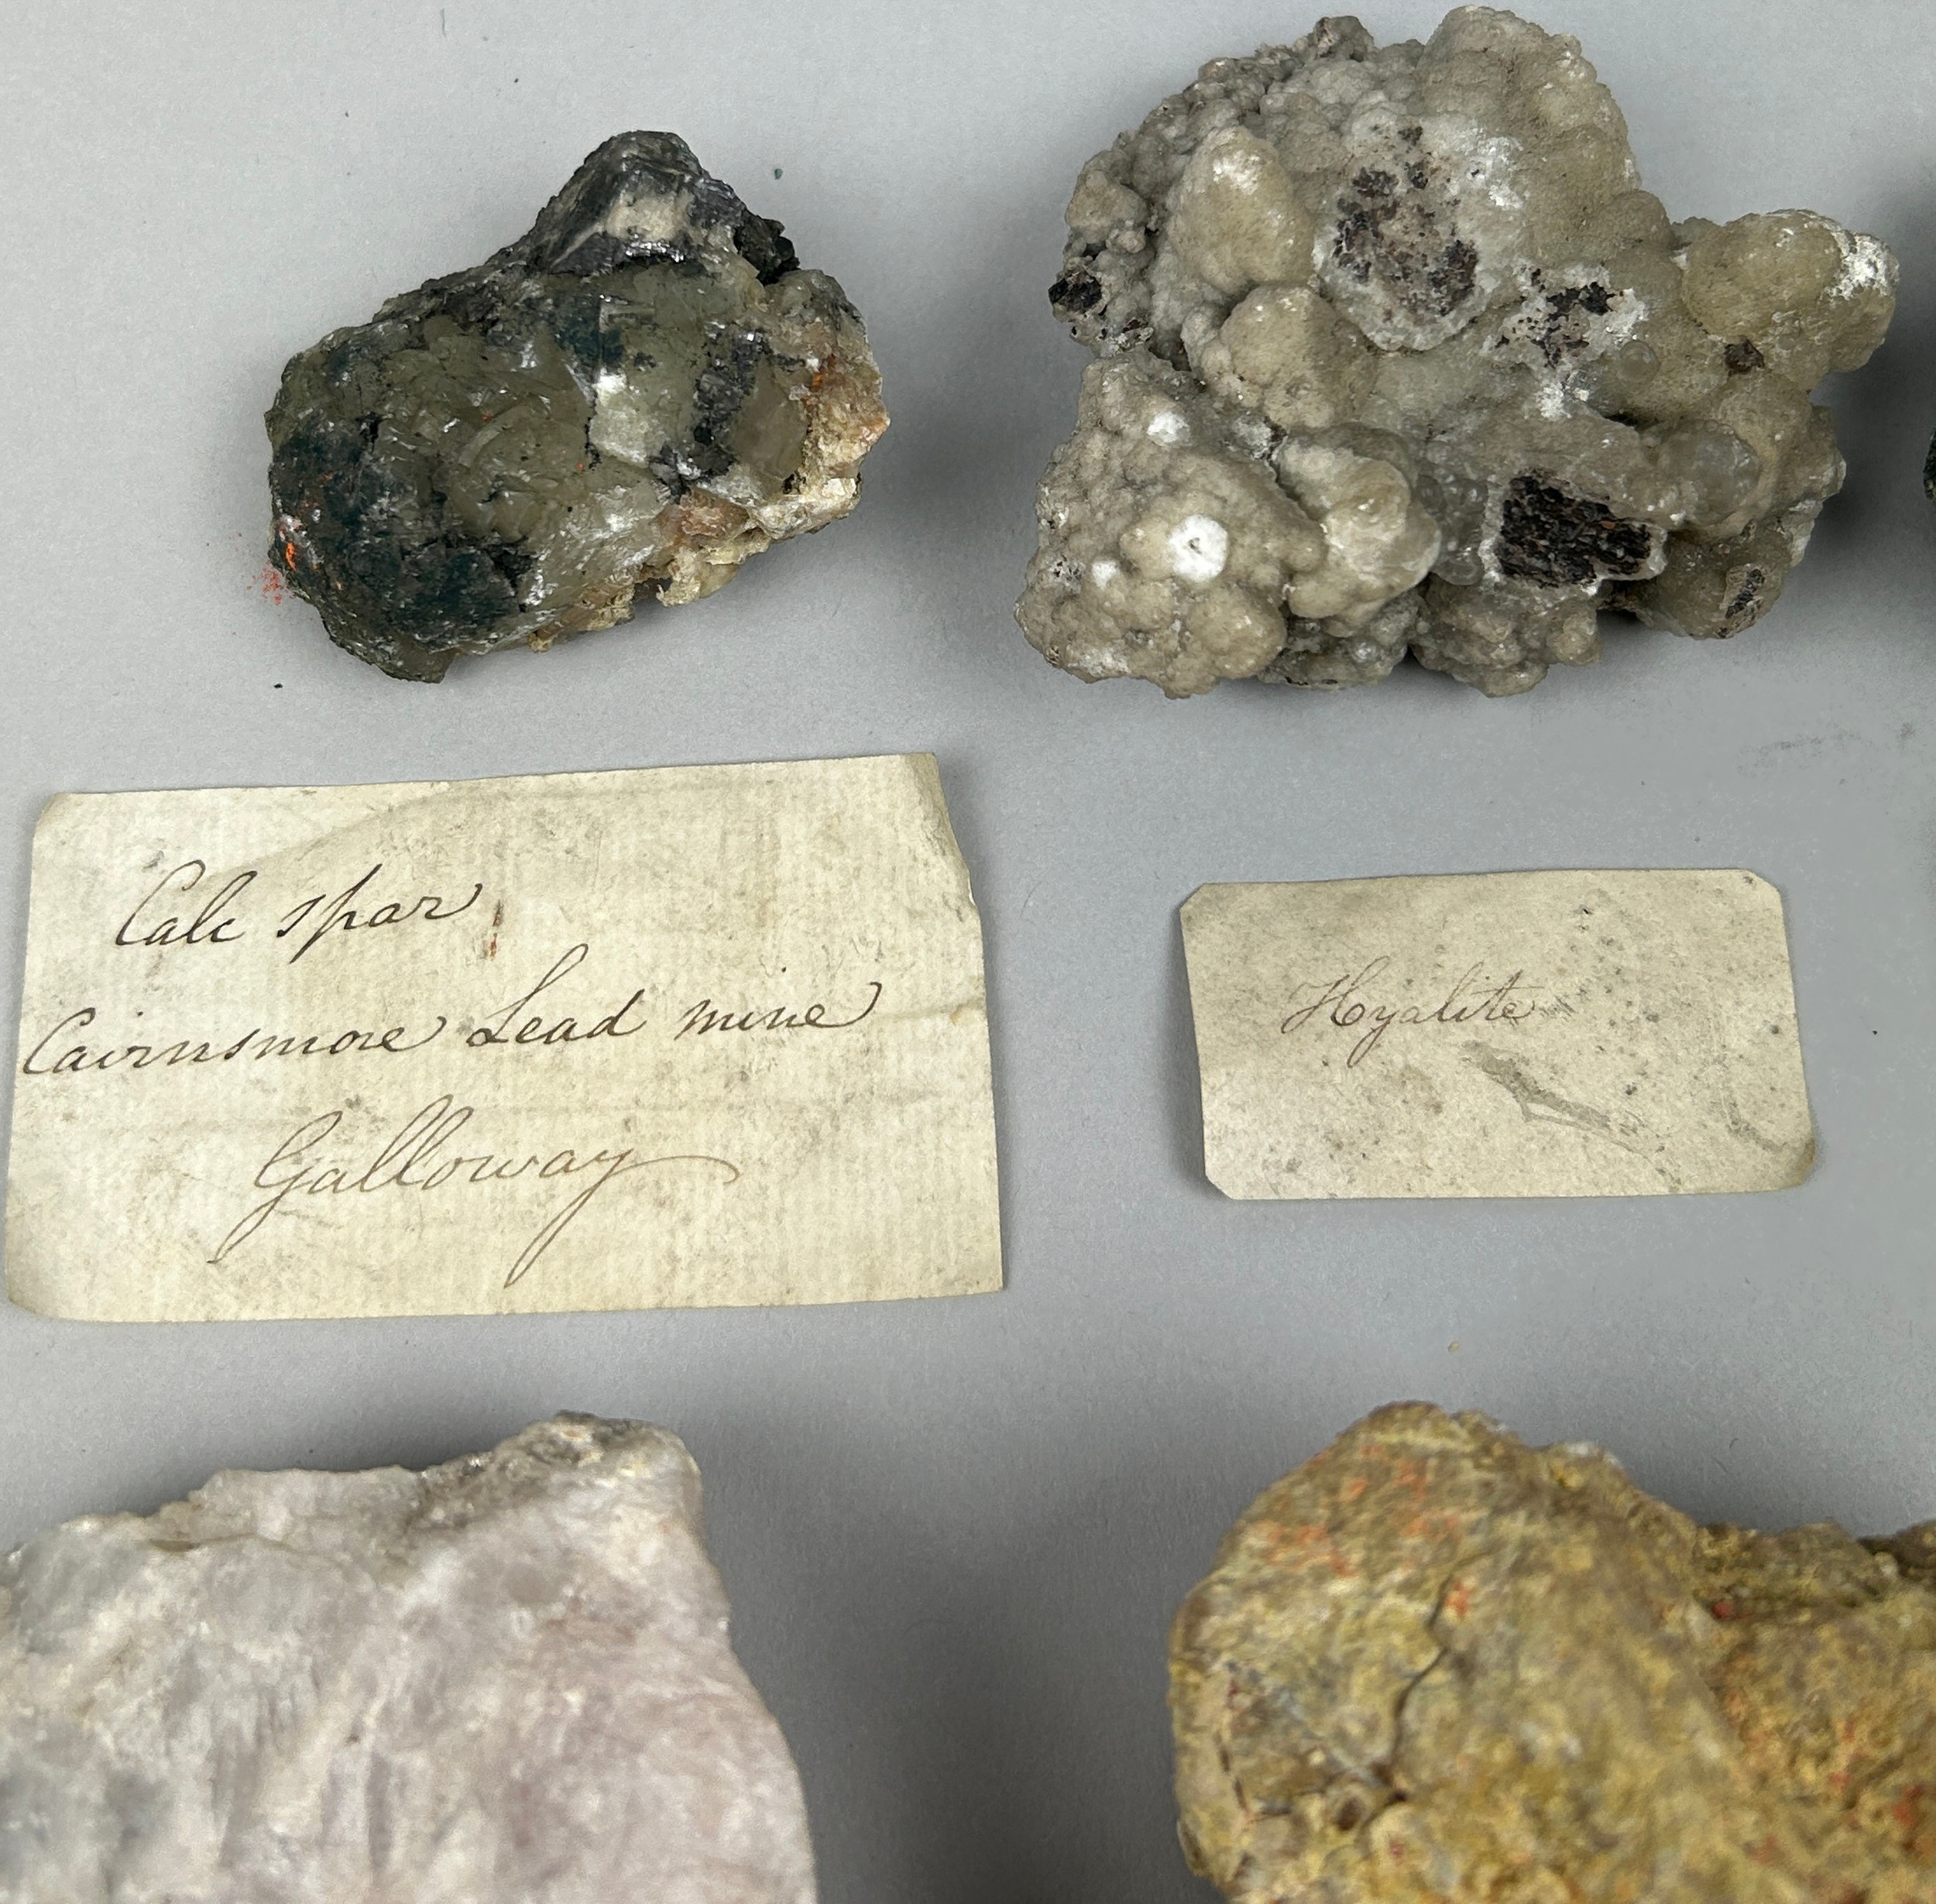 A RARE CABINET COLLECTION OF MINERALS CIRCA 1810-1860, including labels for some very important - Image 8 of 30